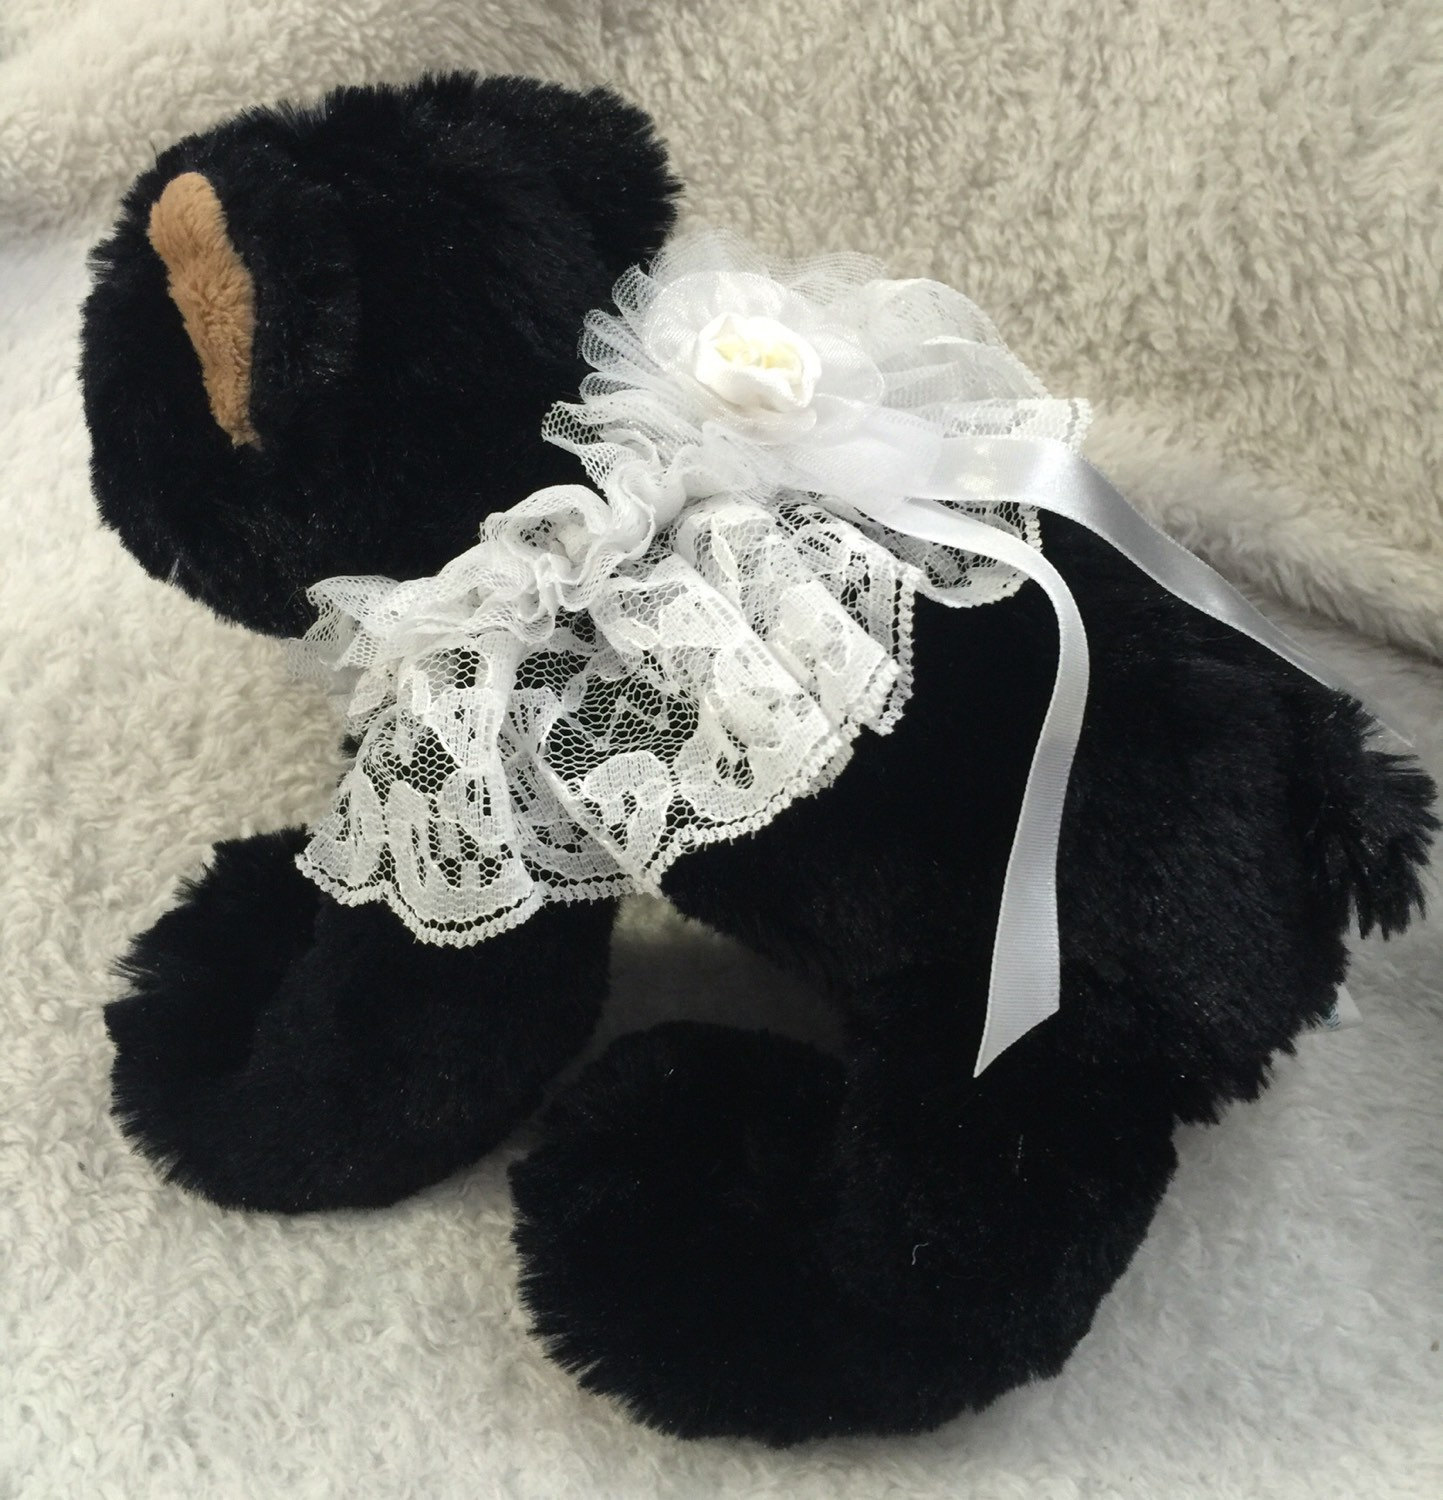 Primary image for Wedding Veil Type Collar for Small or Toy Dogs